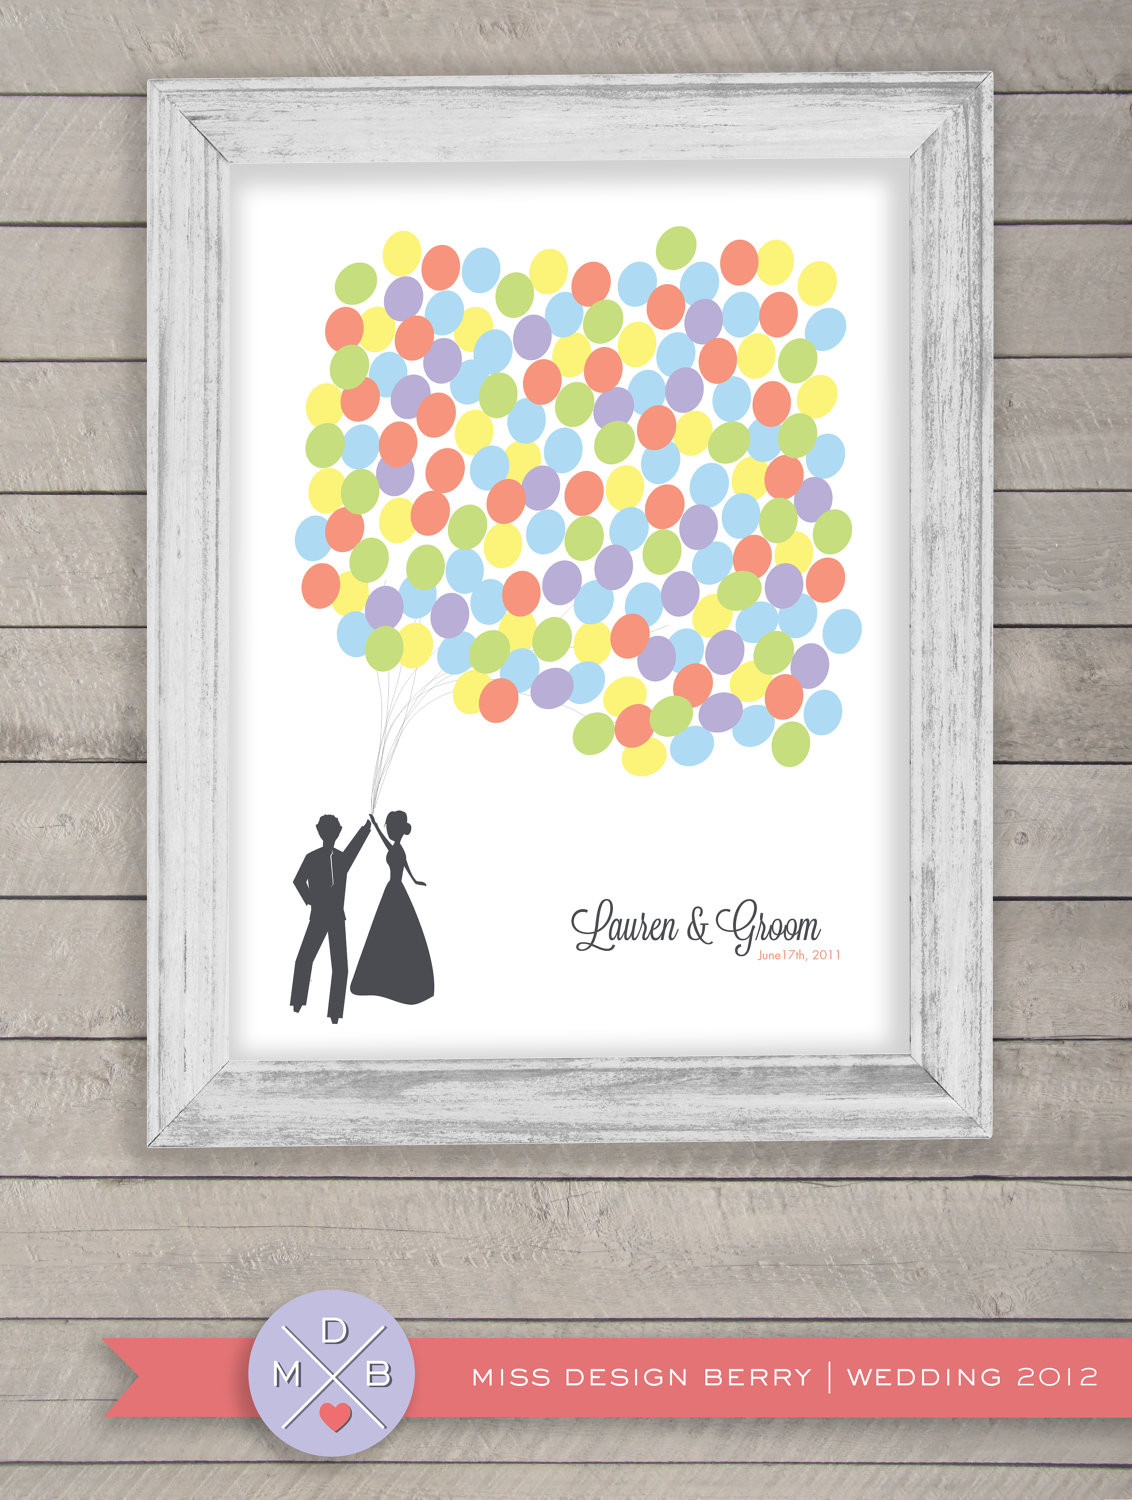 Wedding Guest Book Balloons
 wedding guest book alternative balloon bunch with by